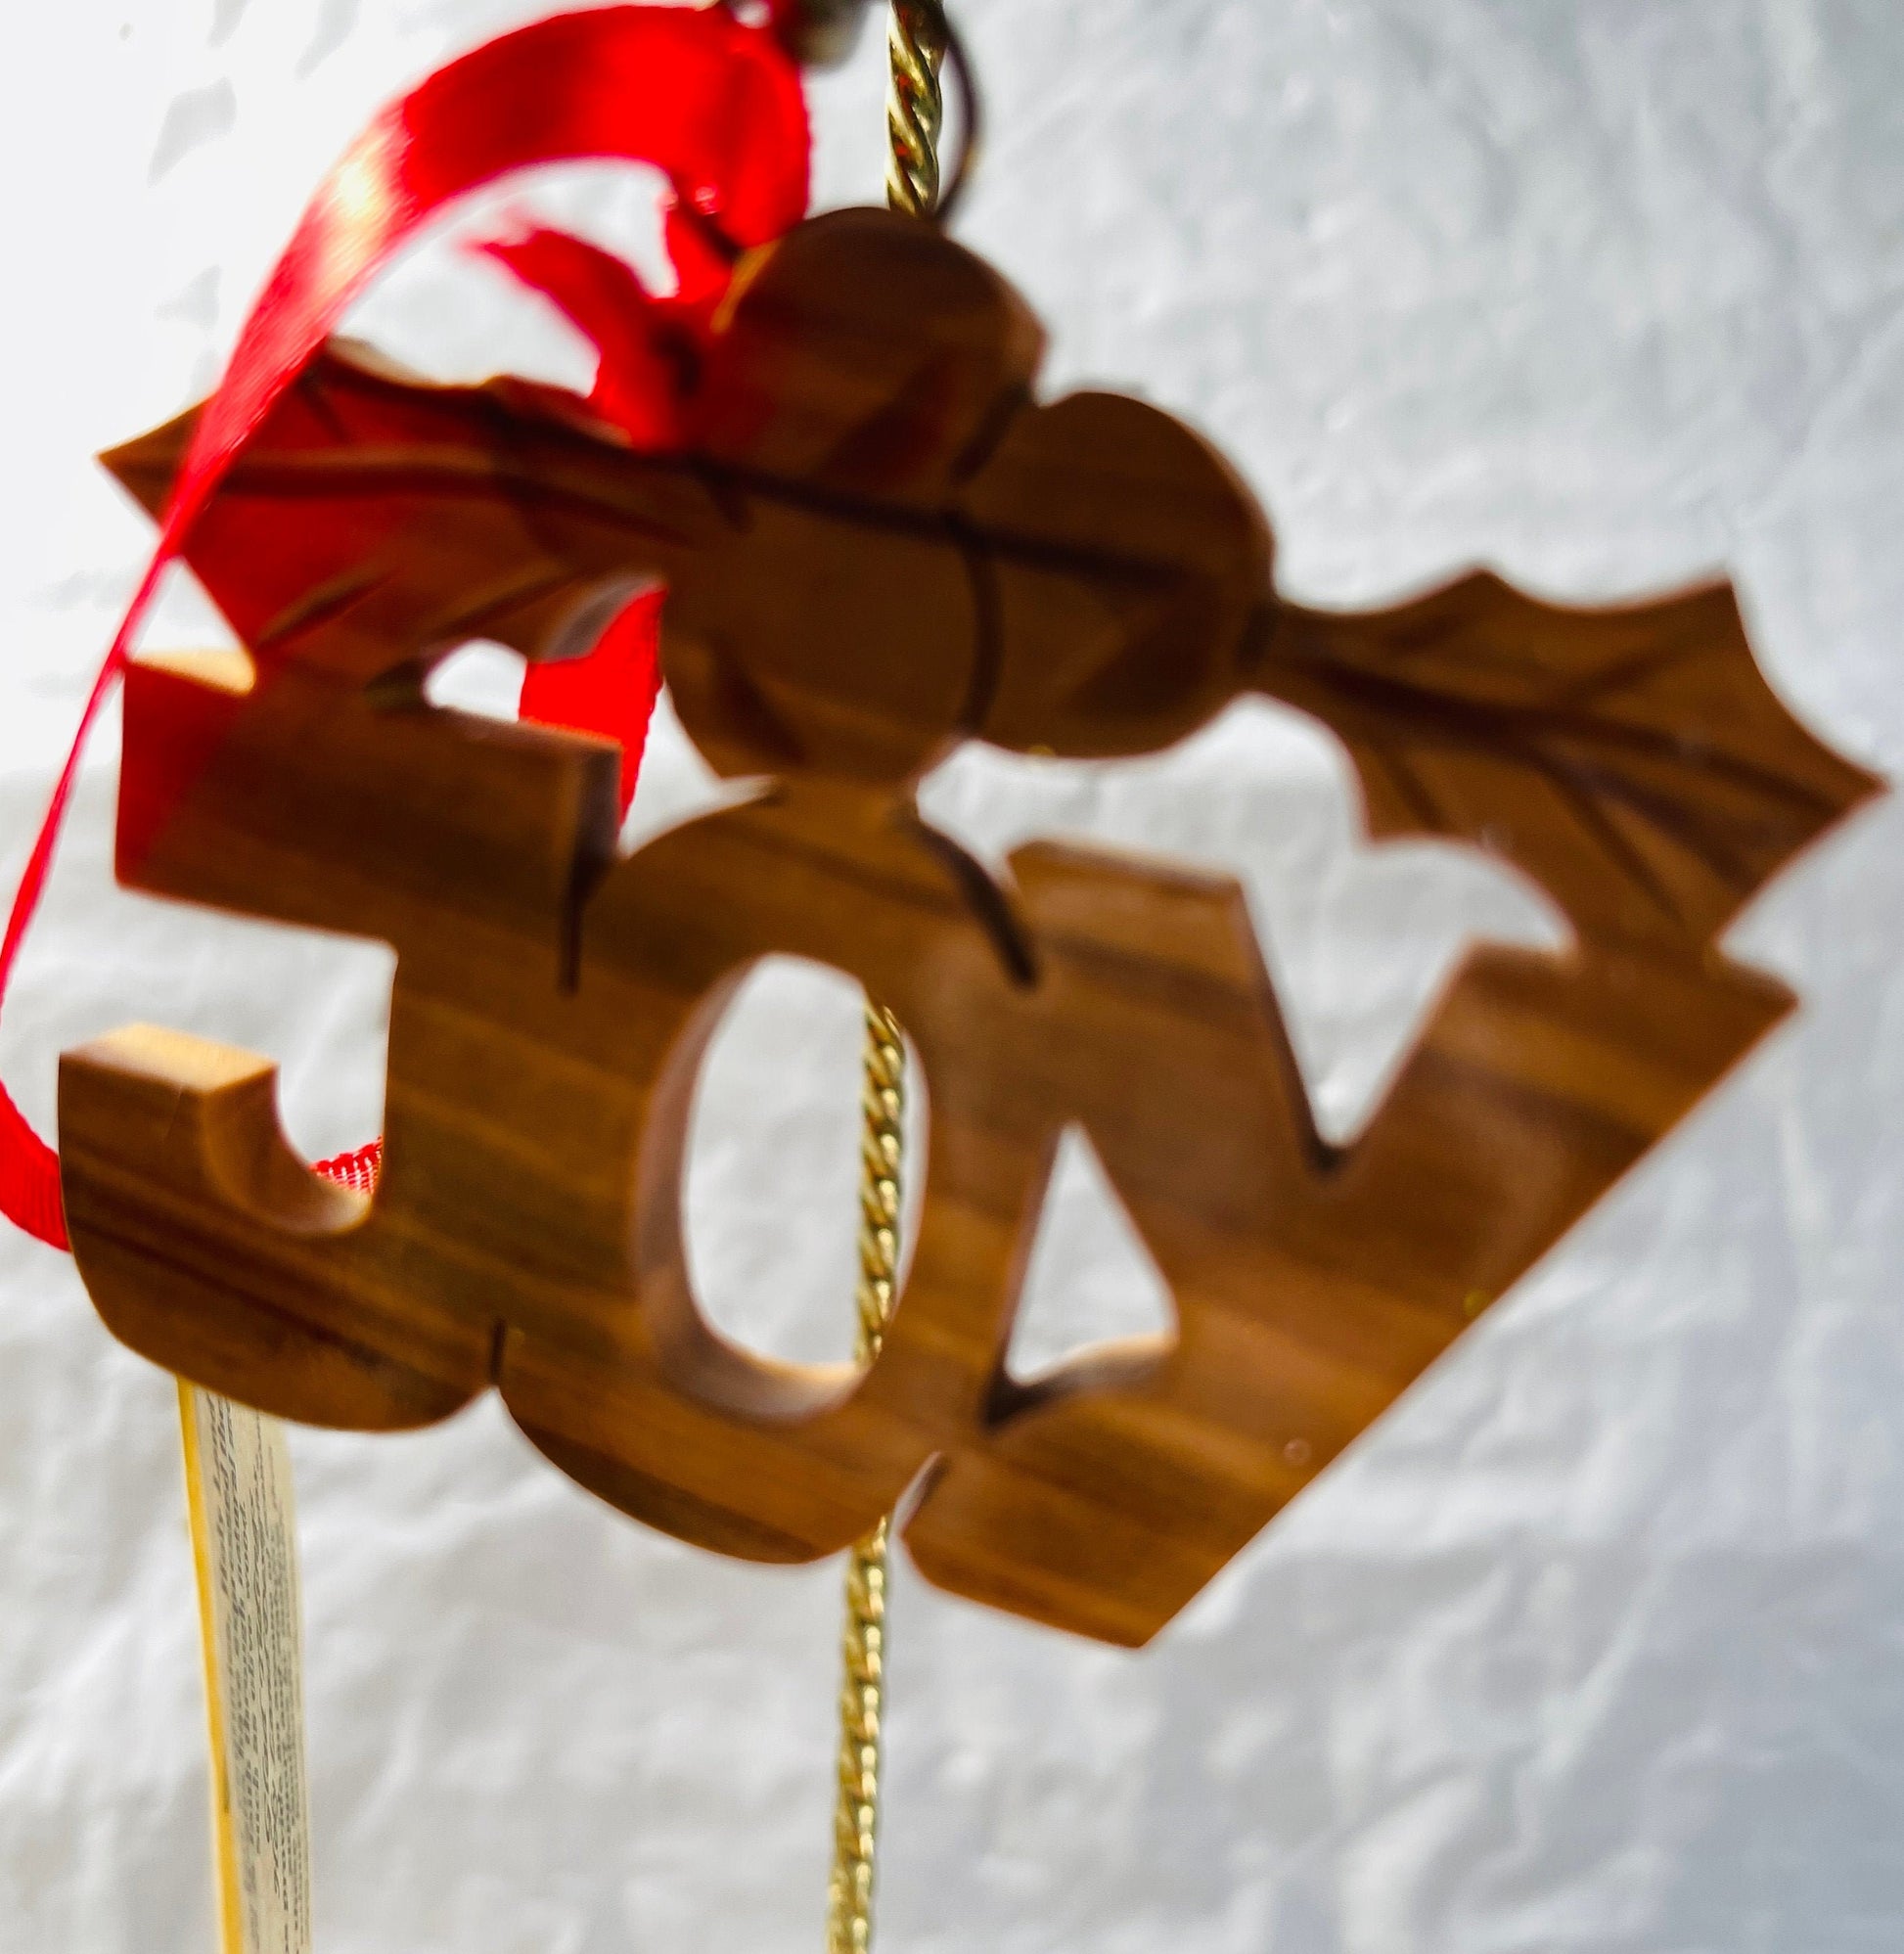 Holy Land Designs, Glad Tidings, Joy with Holly, Carved Wood Ornament, Handmade In Jordan